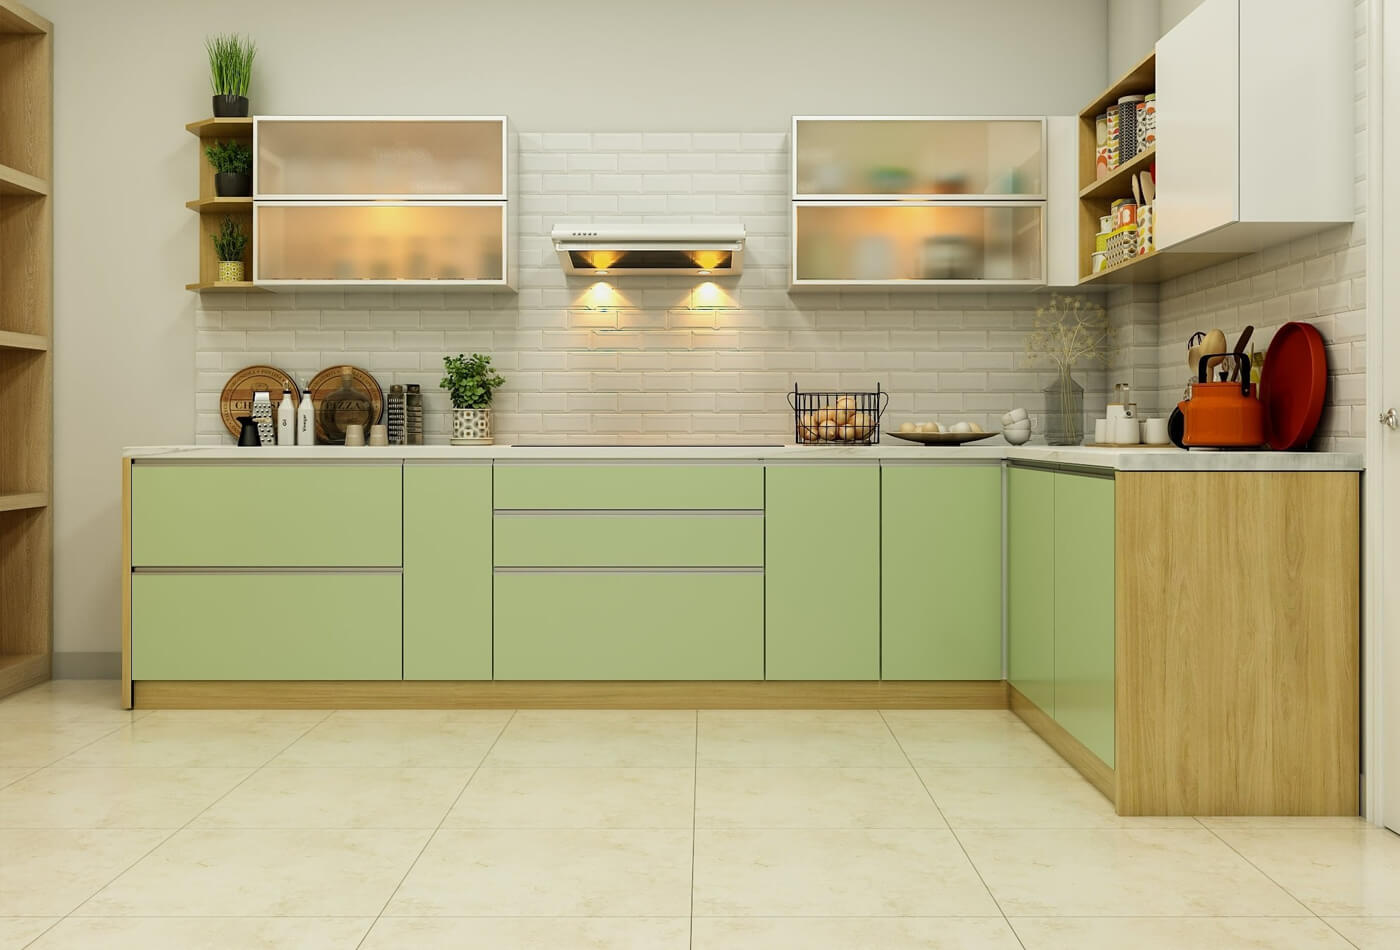 Flooring Option for Small Kitchens; Stepping Up Your Style